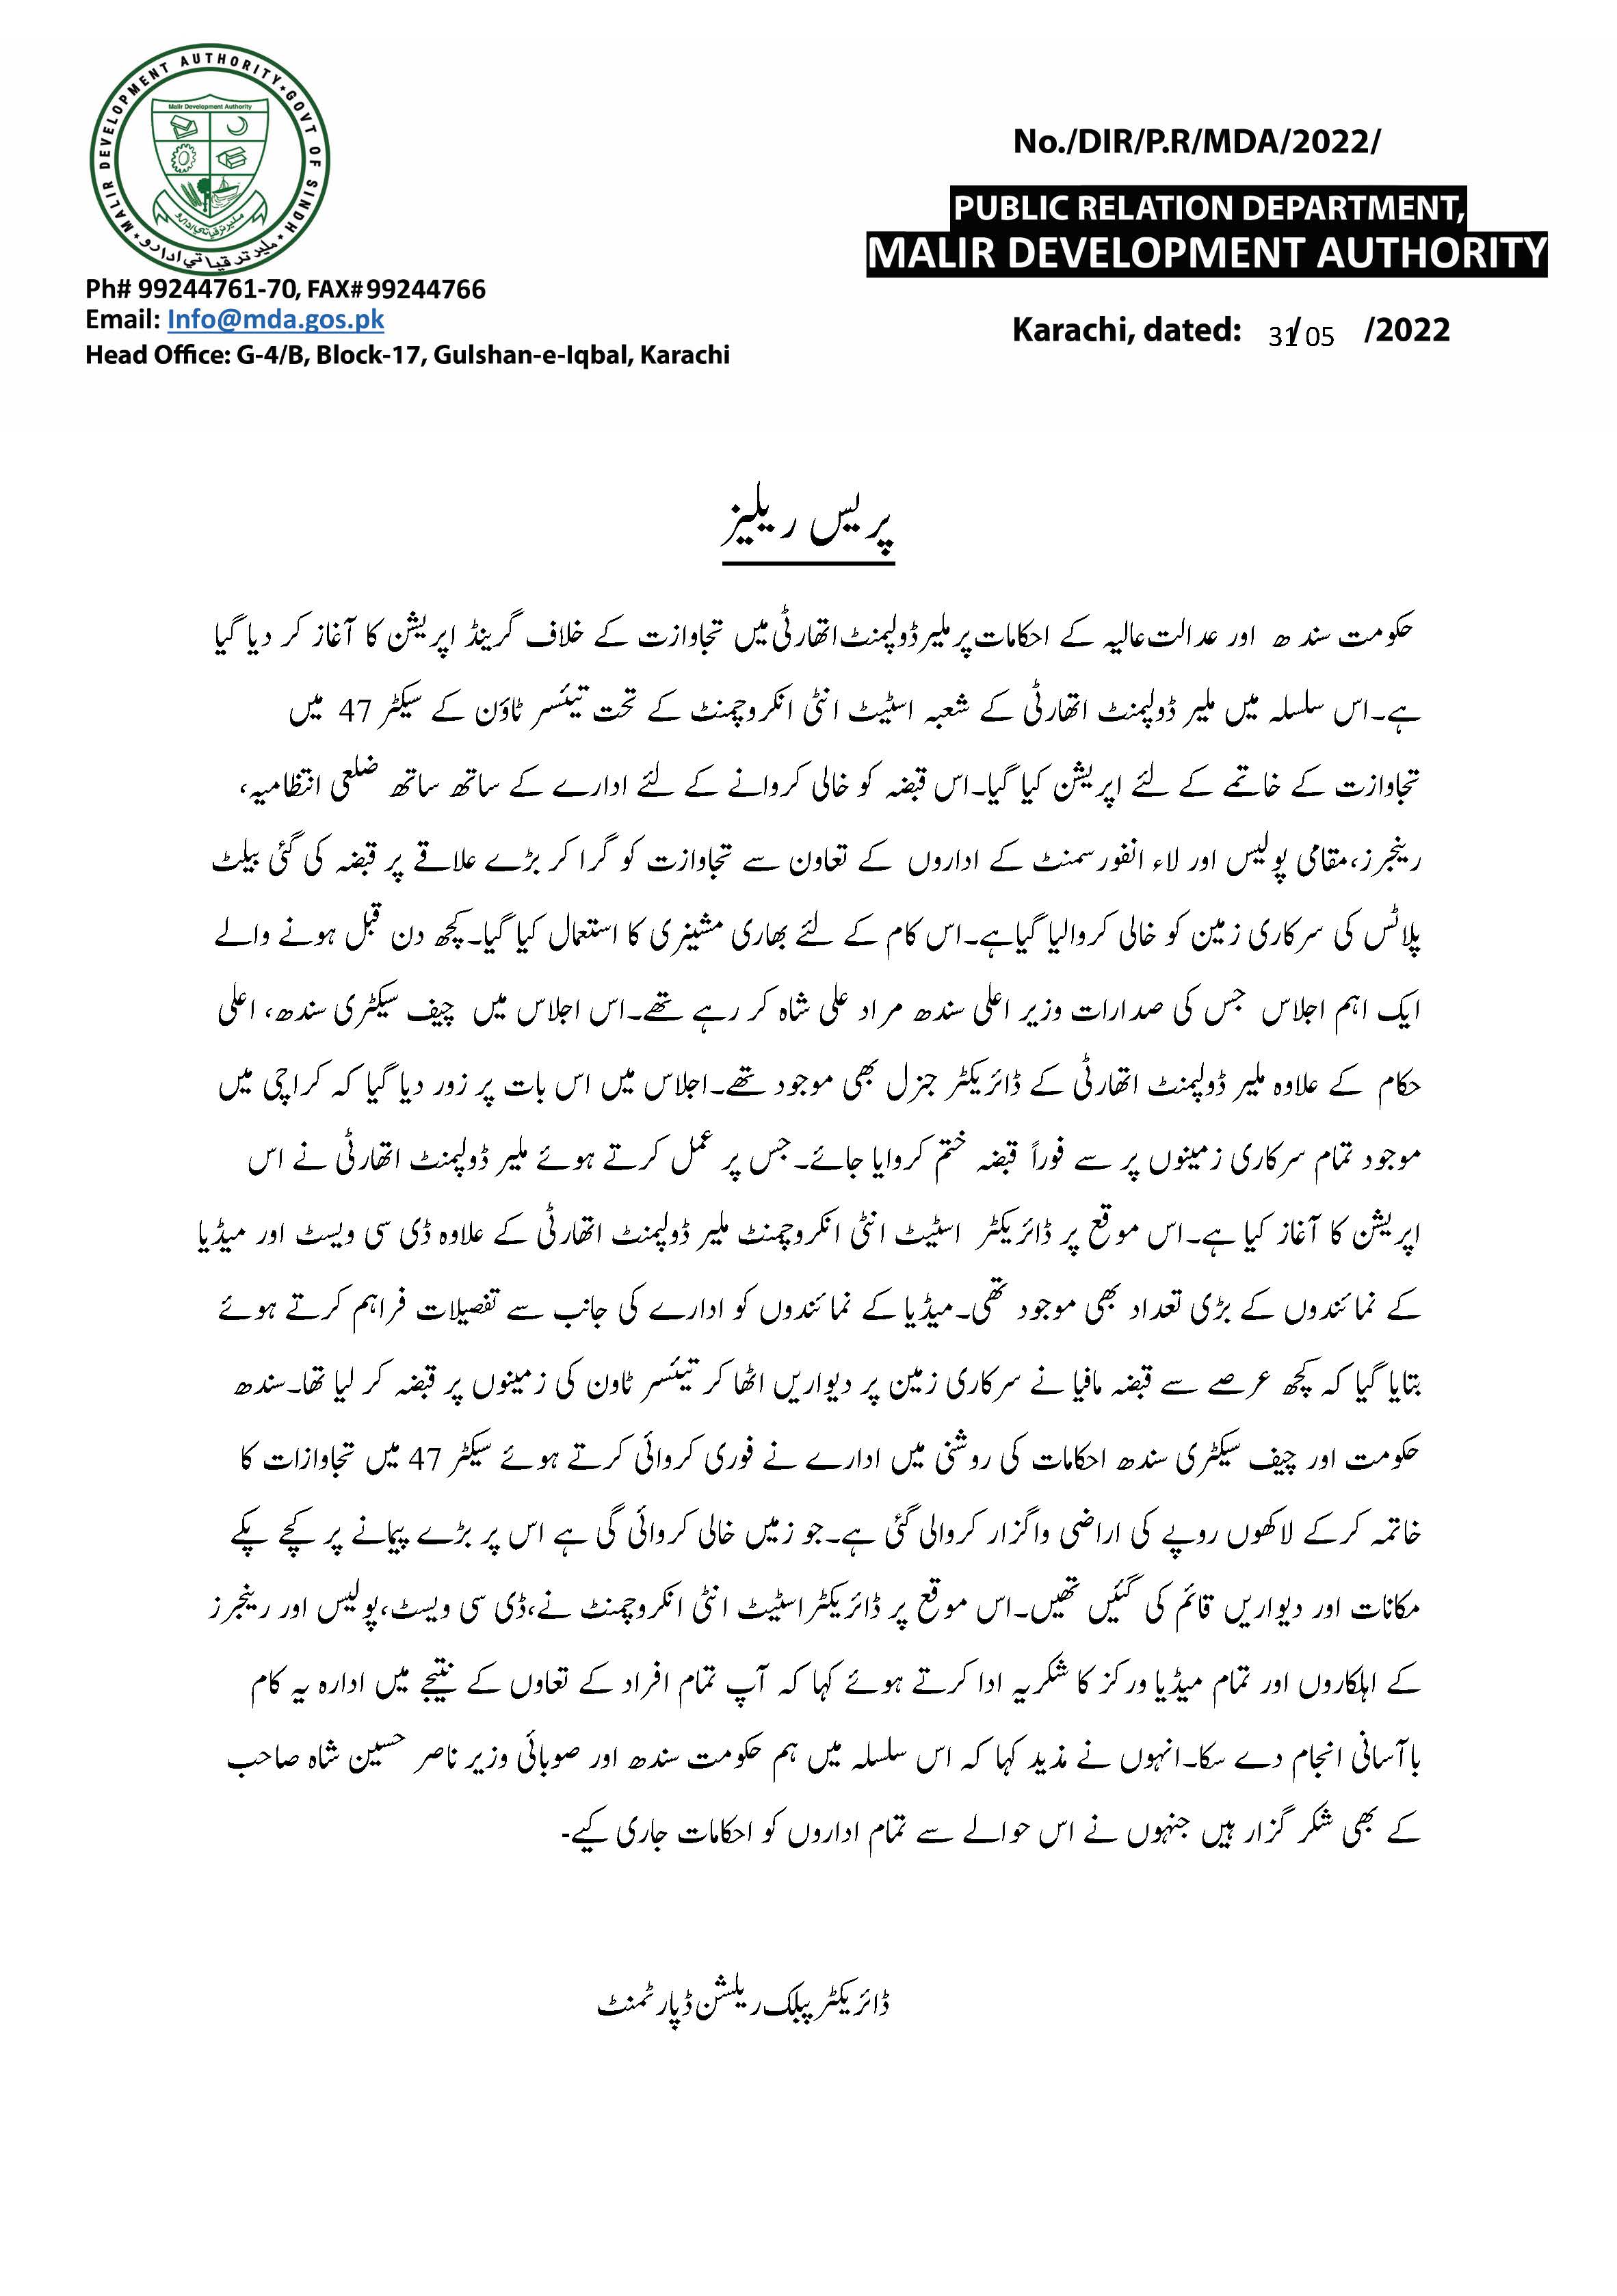 Press Release 31 May 2022